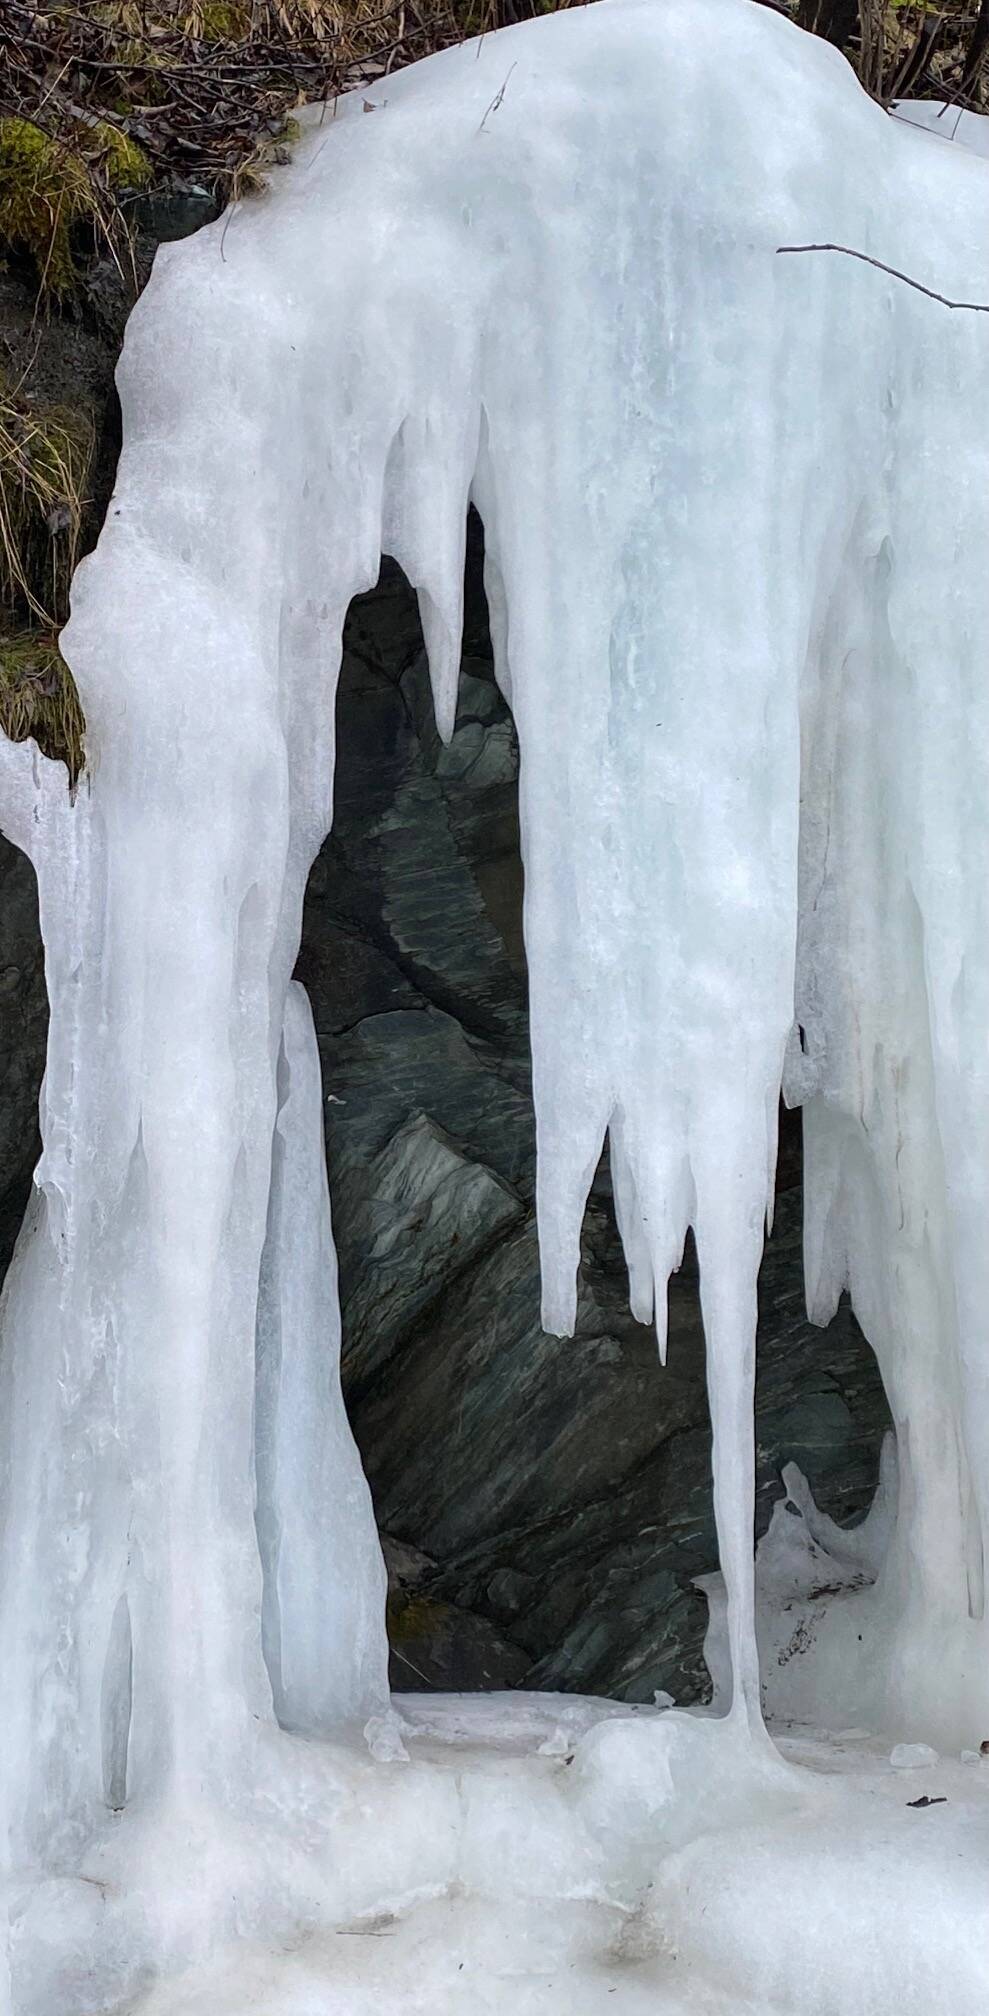 Dramatic icy falls frozen in time. (Courtesy Photo / Denise Carroll)